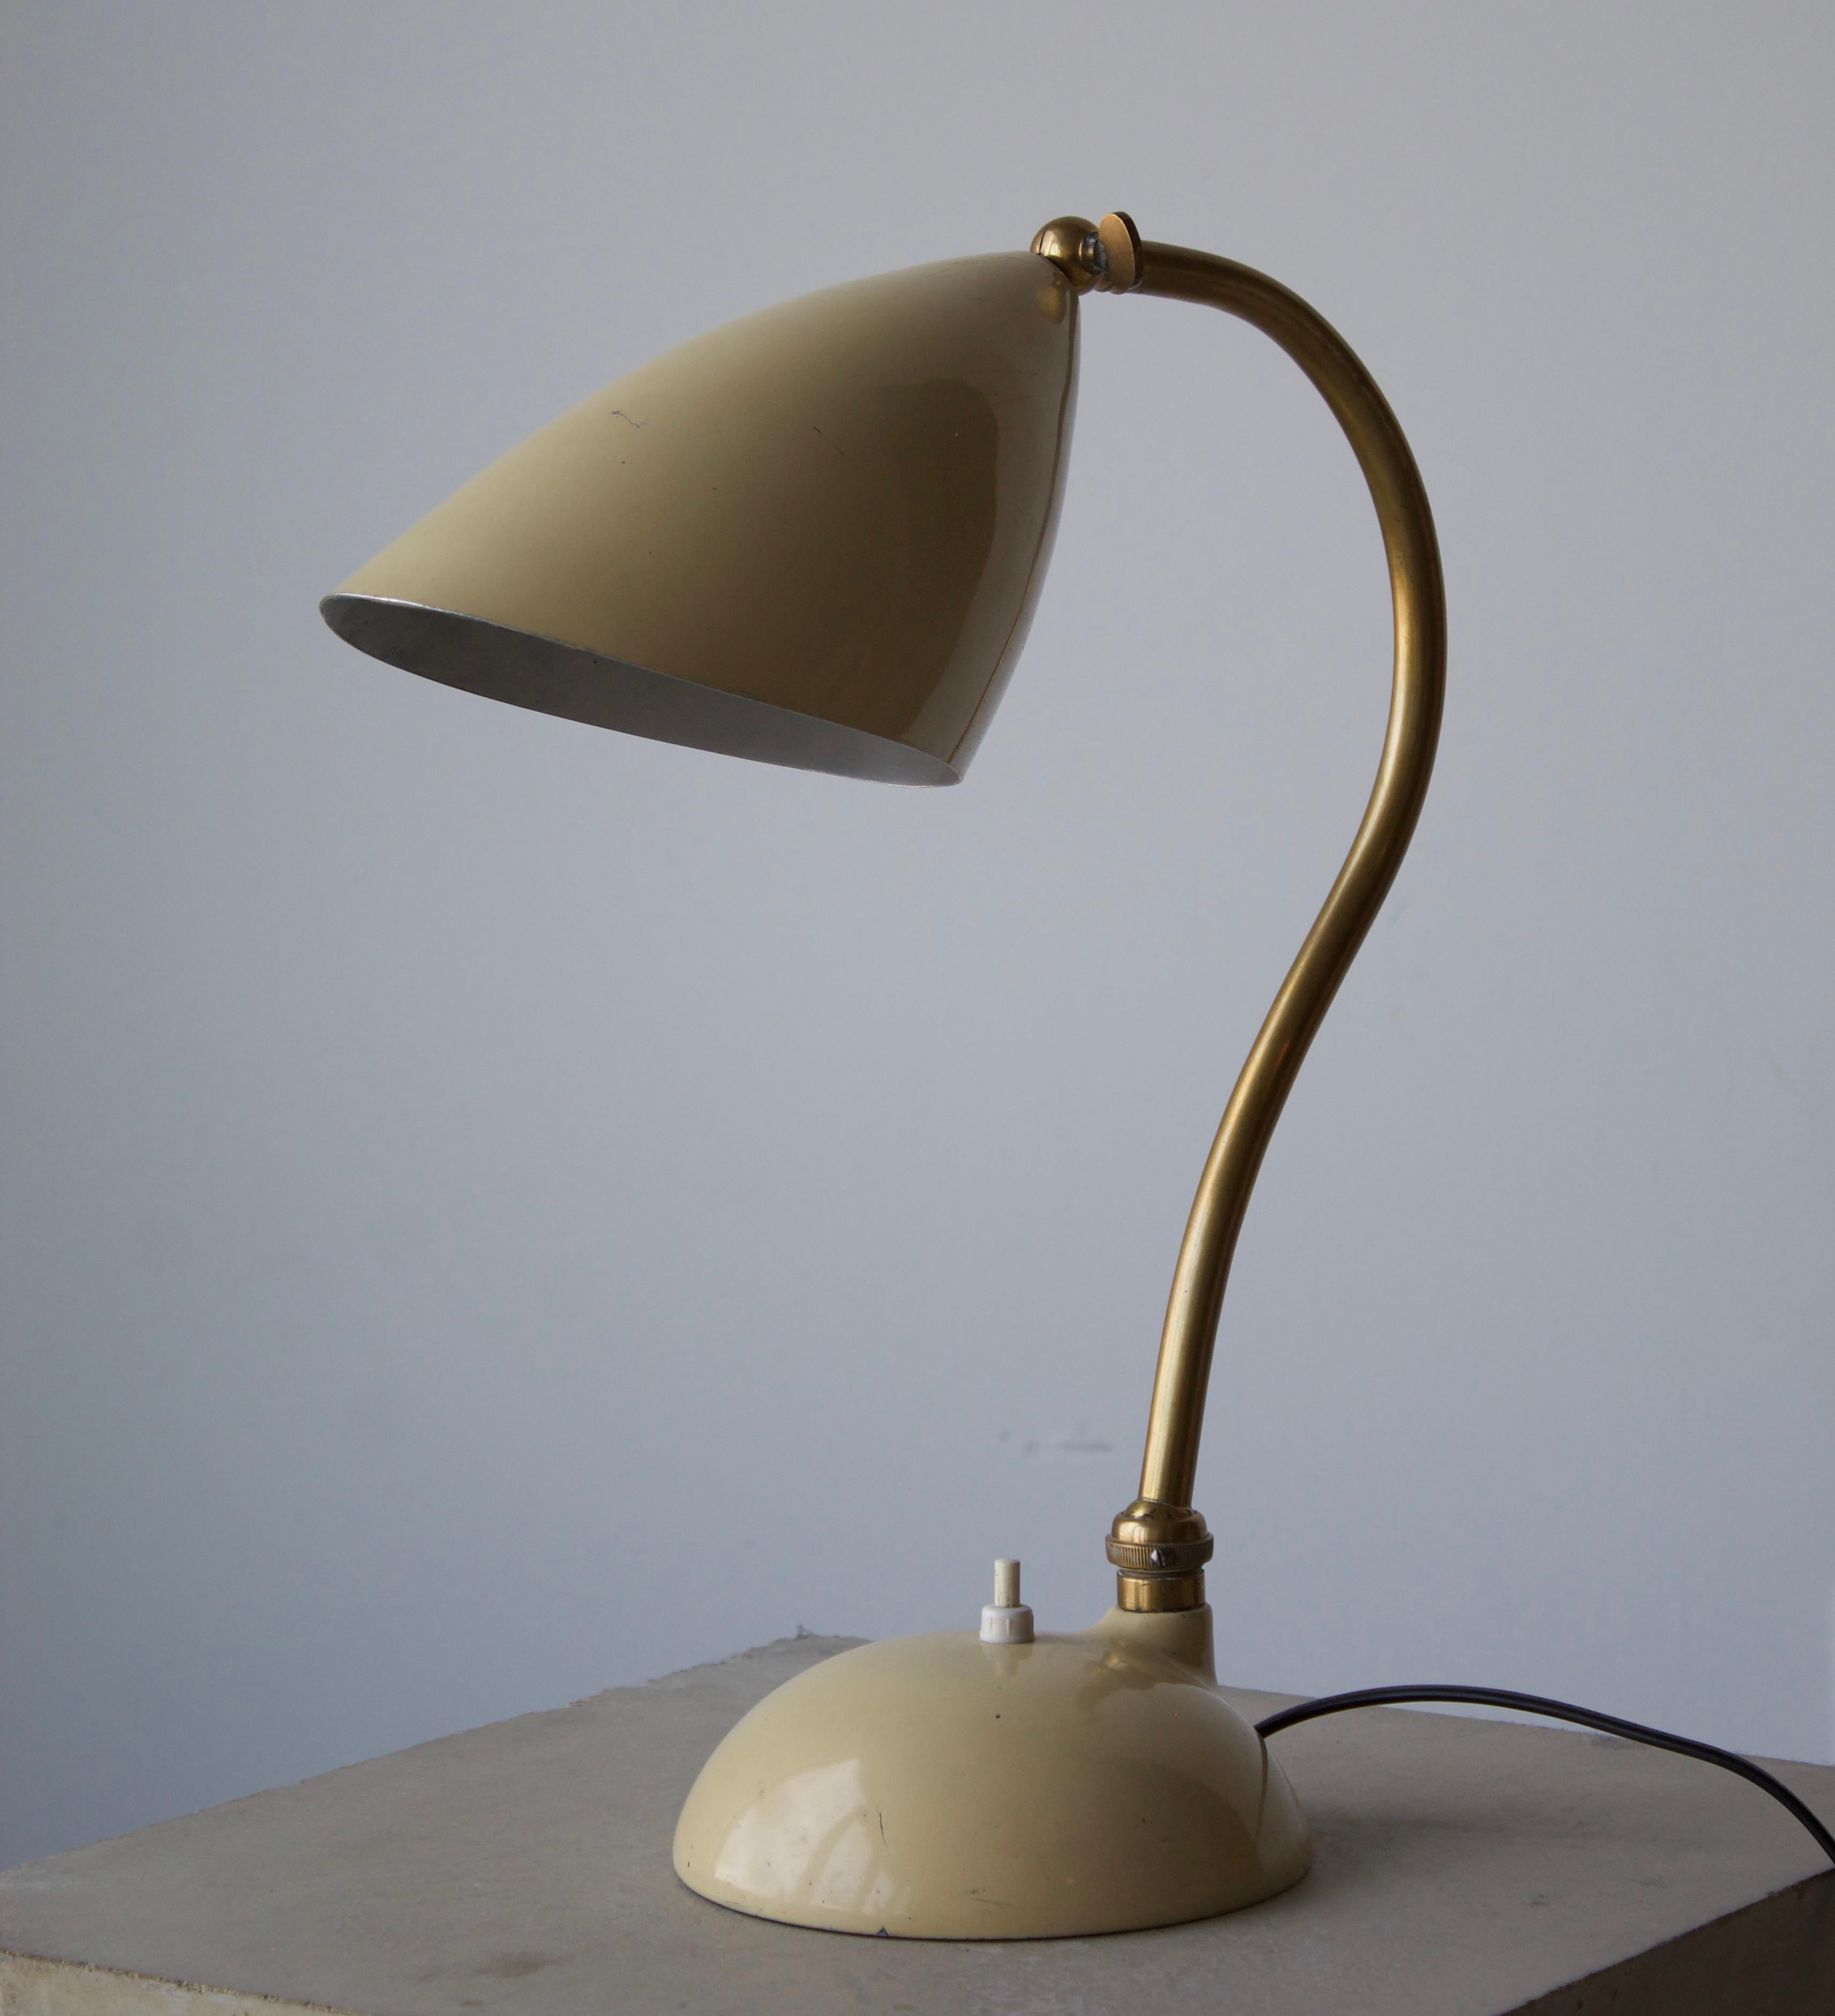 A table lamp / desk light. Designed by an unknown Italian designer. Produced in Italy, 1950s. brass base, white lacquered metal screen and base. 

Other Italian lighting designers of the period include Angelo Lelii, Max Ingrand, Gino Sarfatti, and